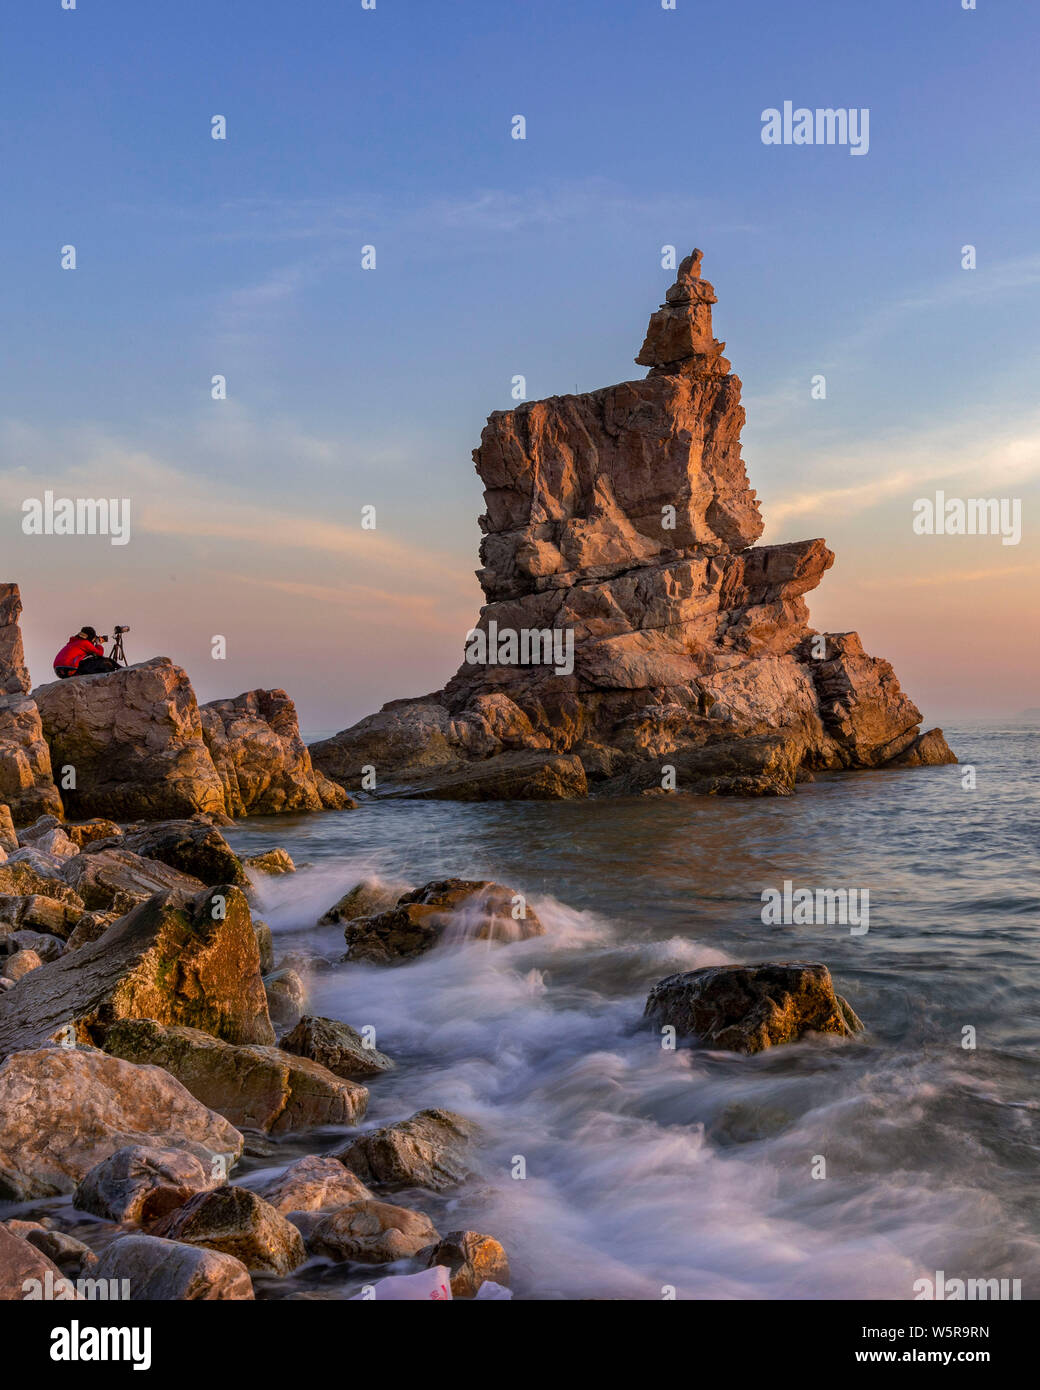 Landscape of the Jiangjunshi Scenic Zone, which is famous for its coastal landforms, at sunset in Dalian city, northeast China's Liaoning province, 31 Stock Photo